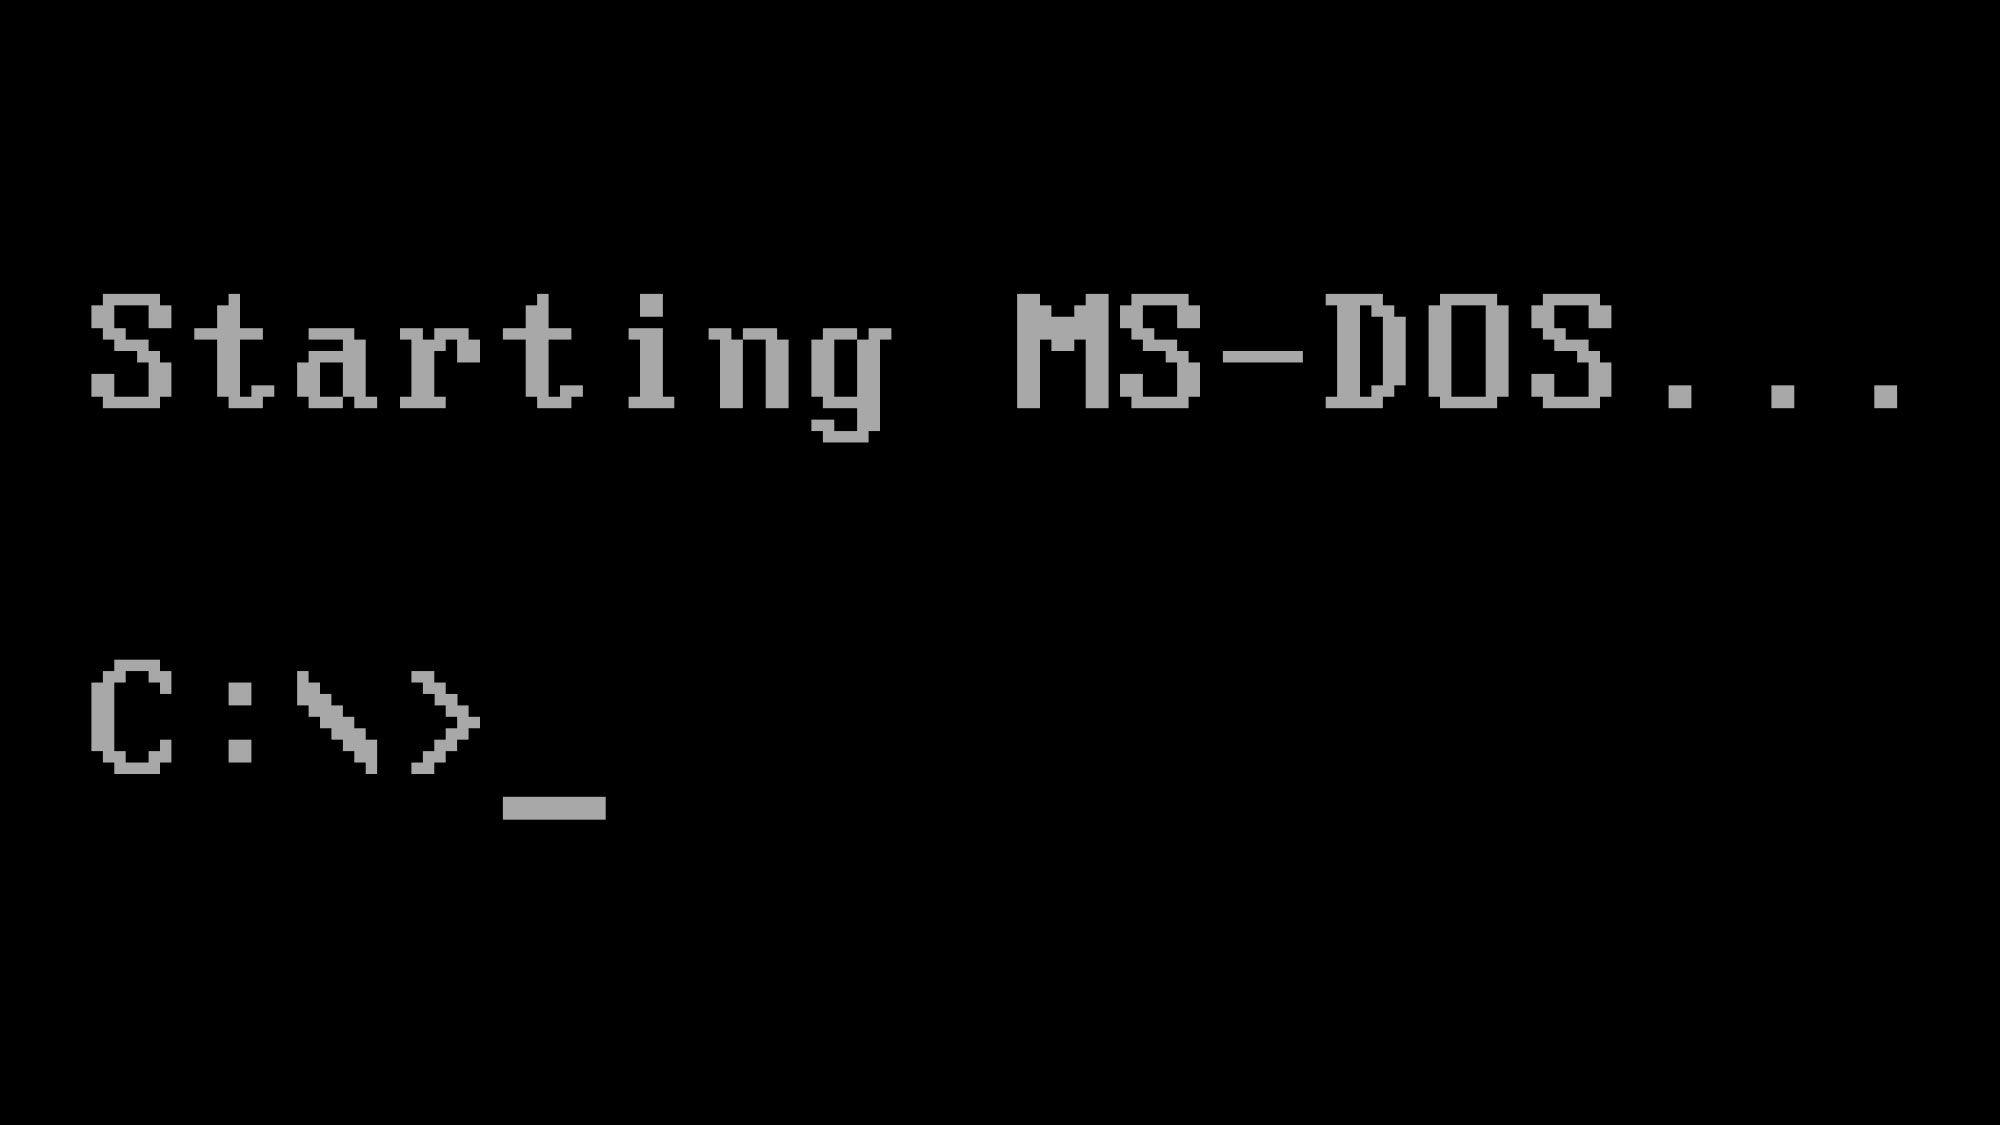 MS-DOS Logo - MS DOS Is 30 Years Old Today